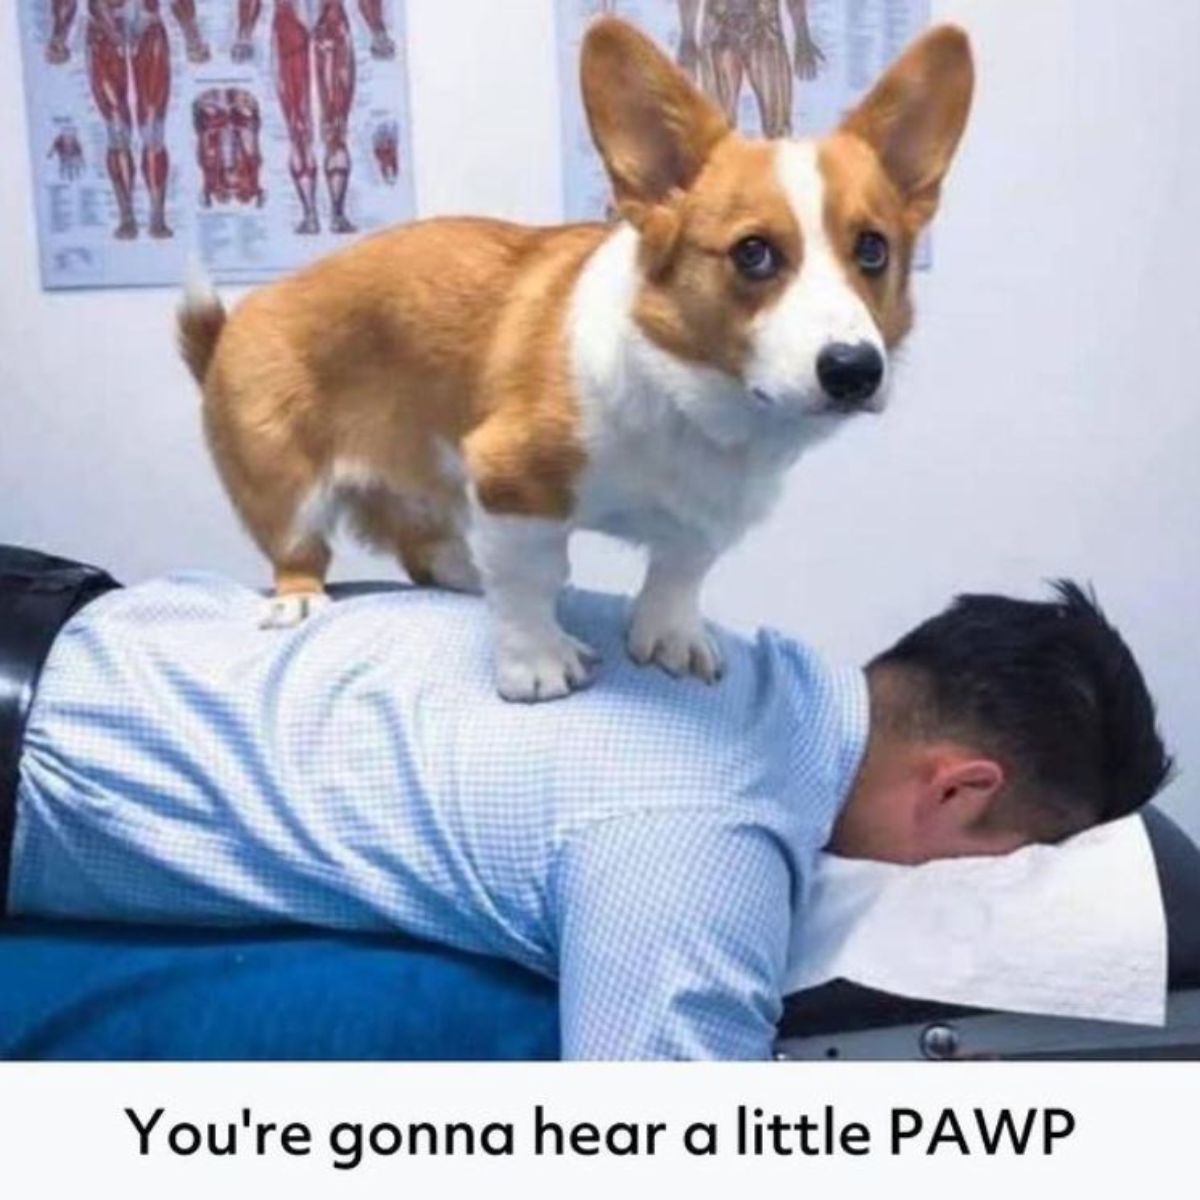 corgi standing on top of the back of the man with a text "You gonna hear a little pawp!"